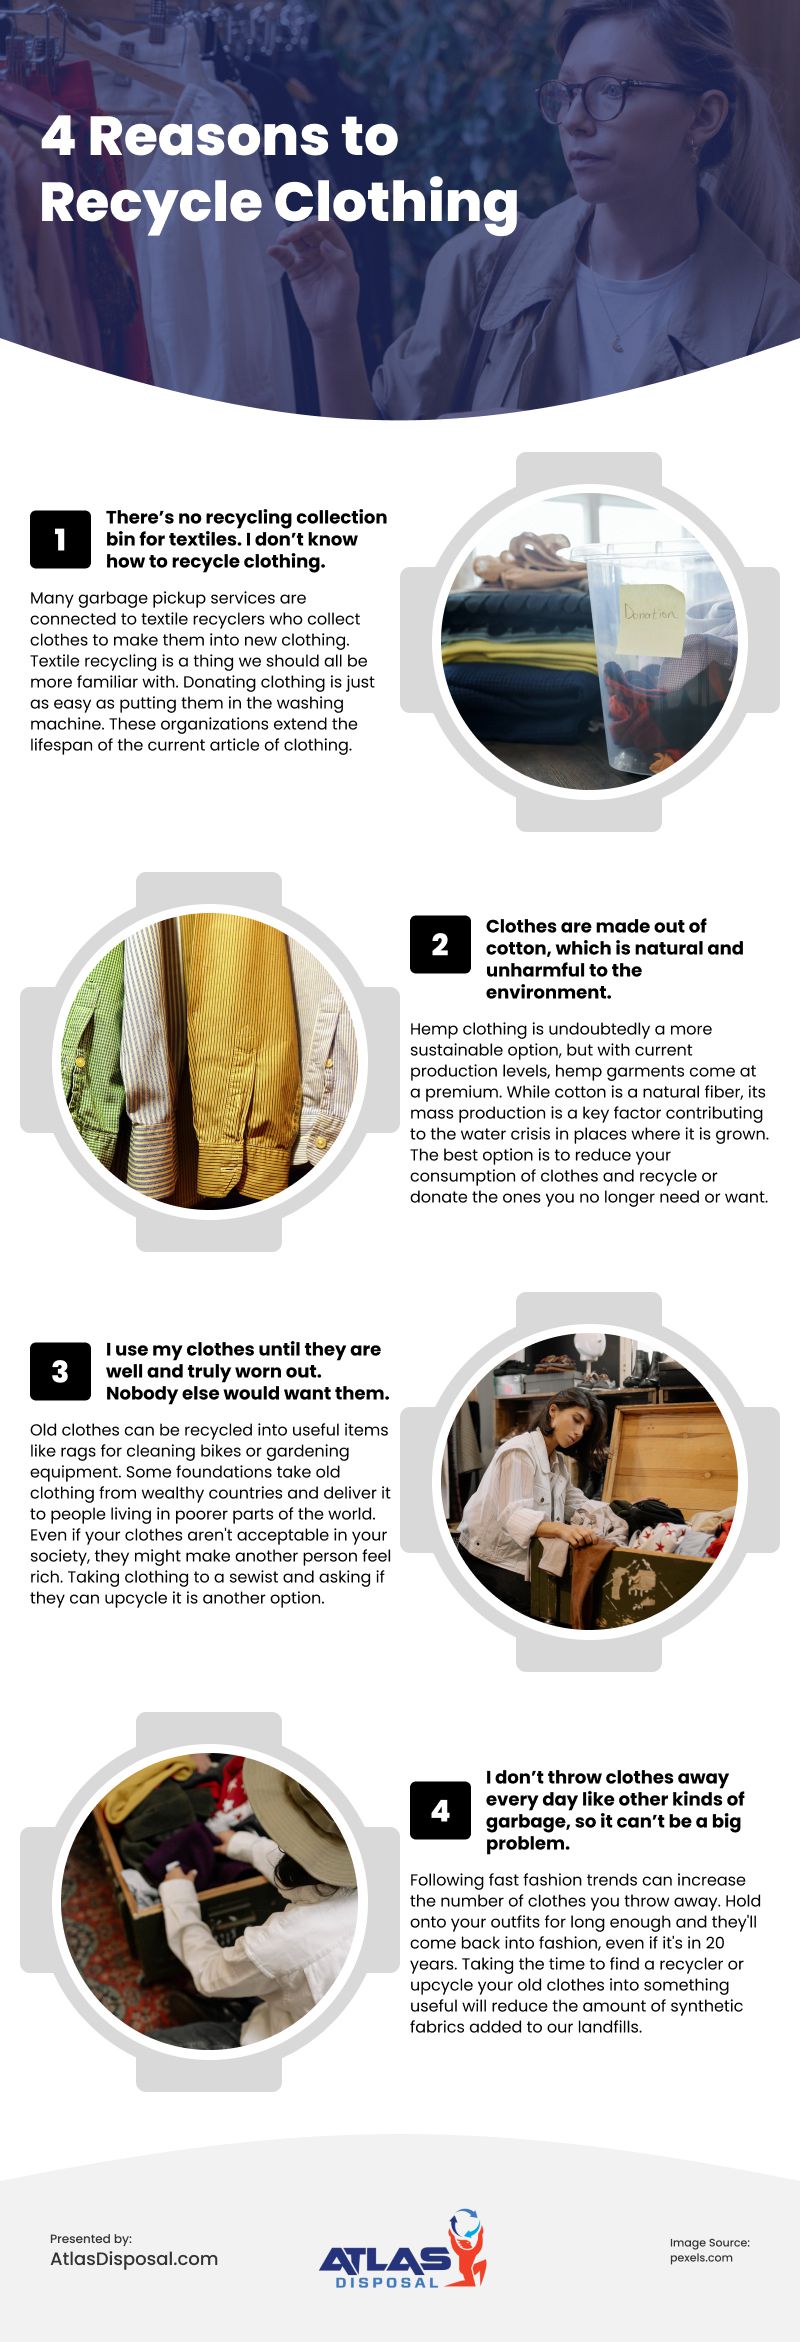 4 Reasons to Recycle Clothing Infographic